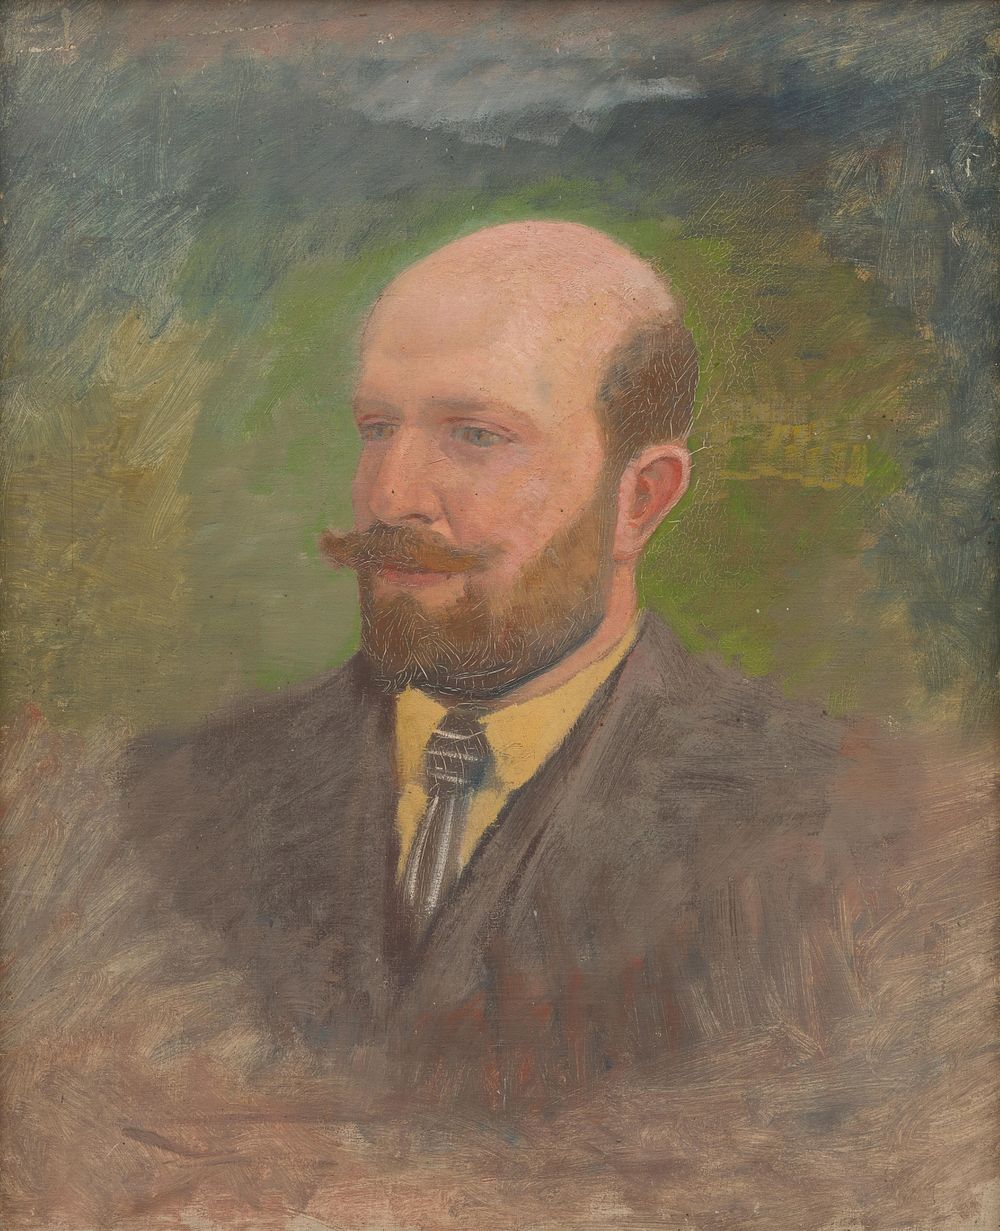 Portrait of a man with a tie by Ladislav Mednyánszky